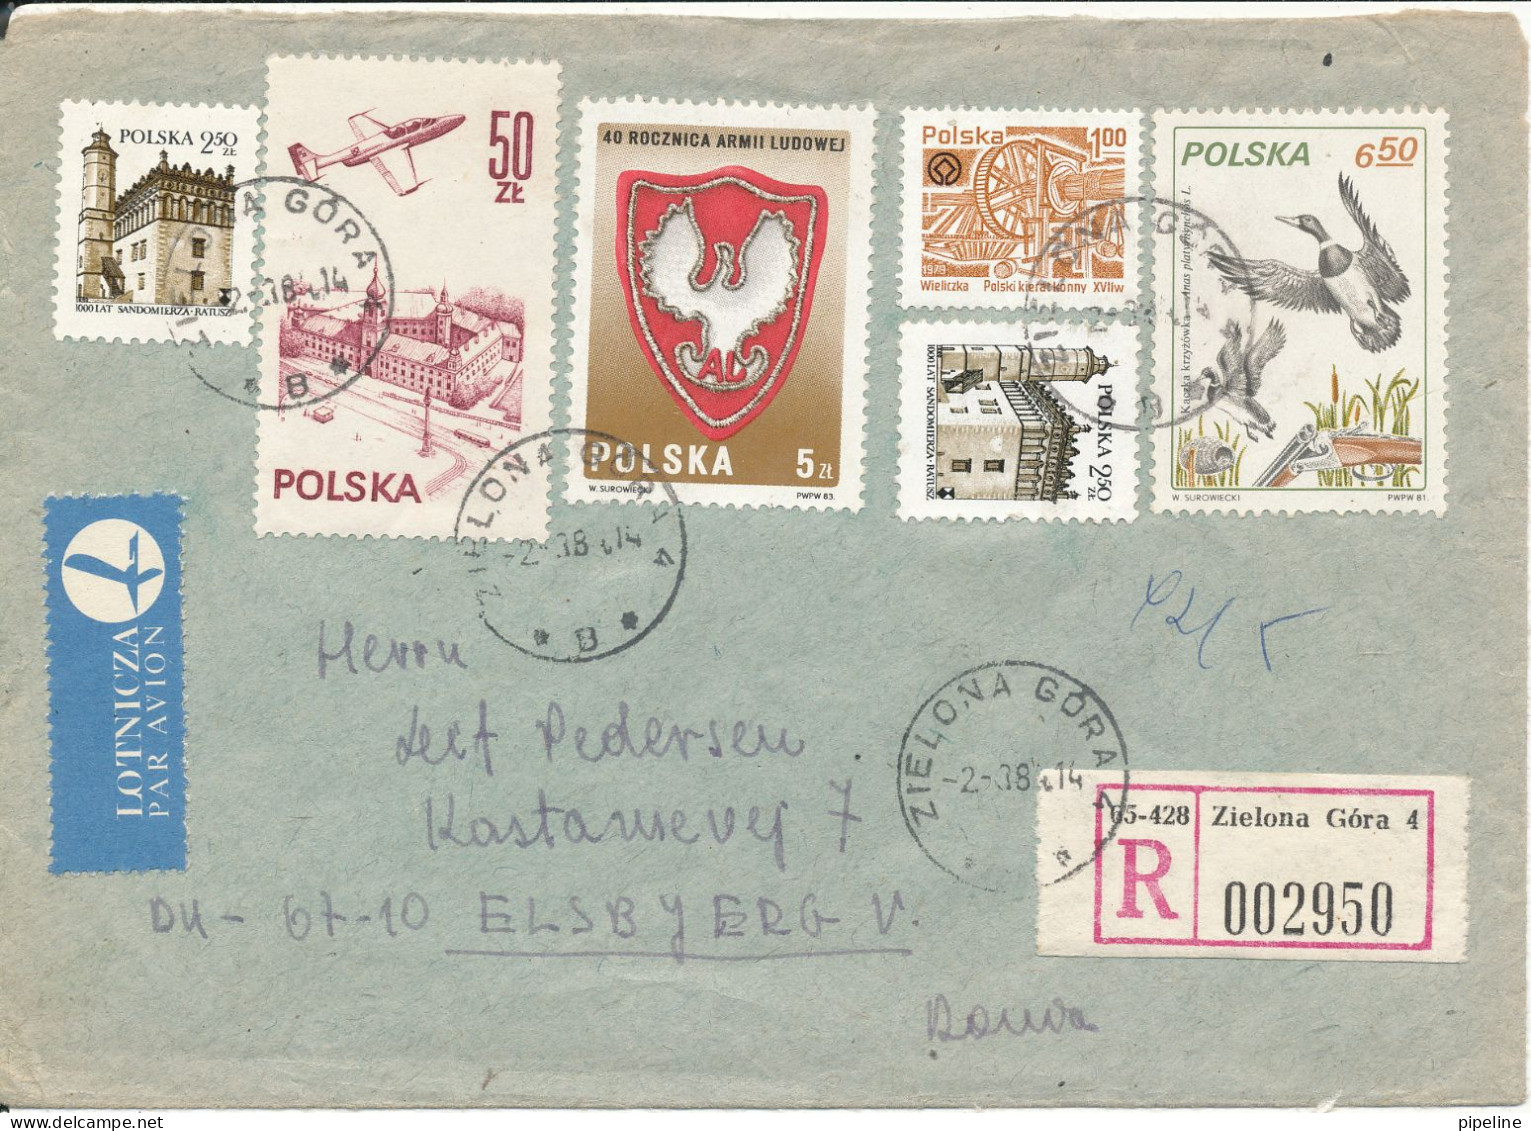 Poland Registered Cover Sent To Denmark Zielona Gora 2-3-1984 With More Topic Stamps - Storia Postale